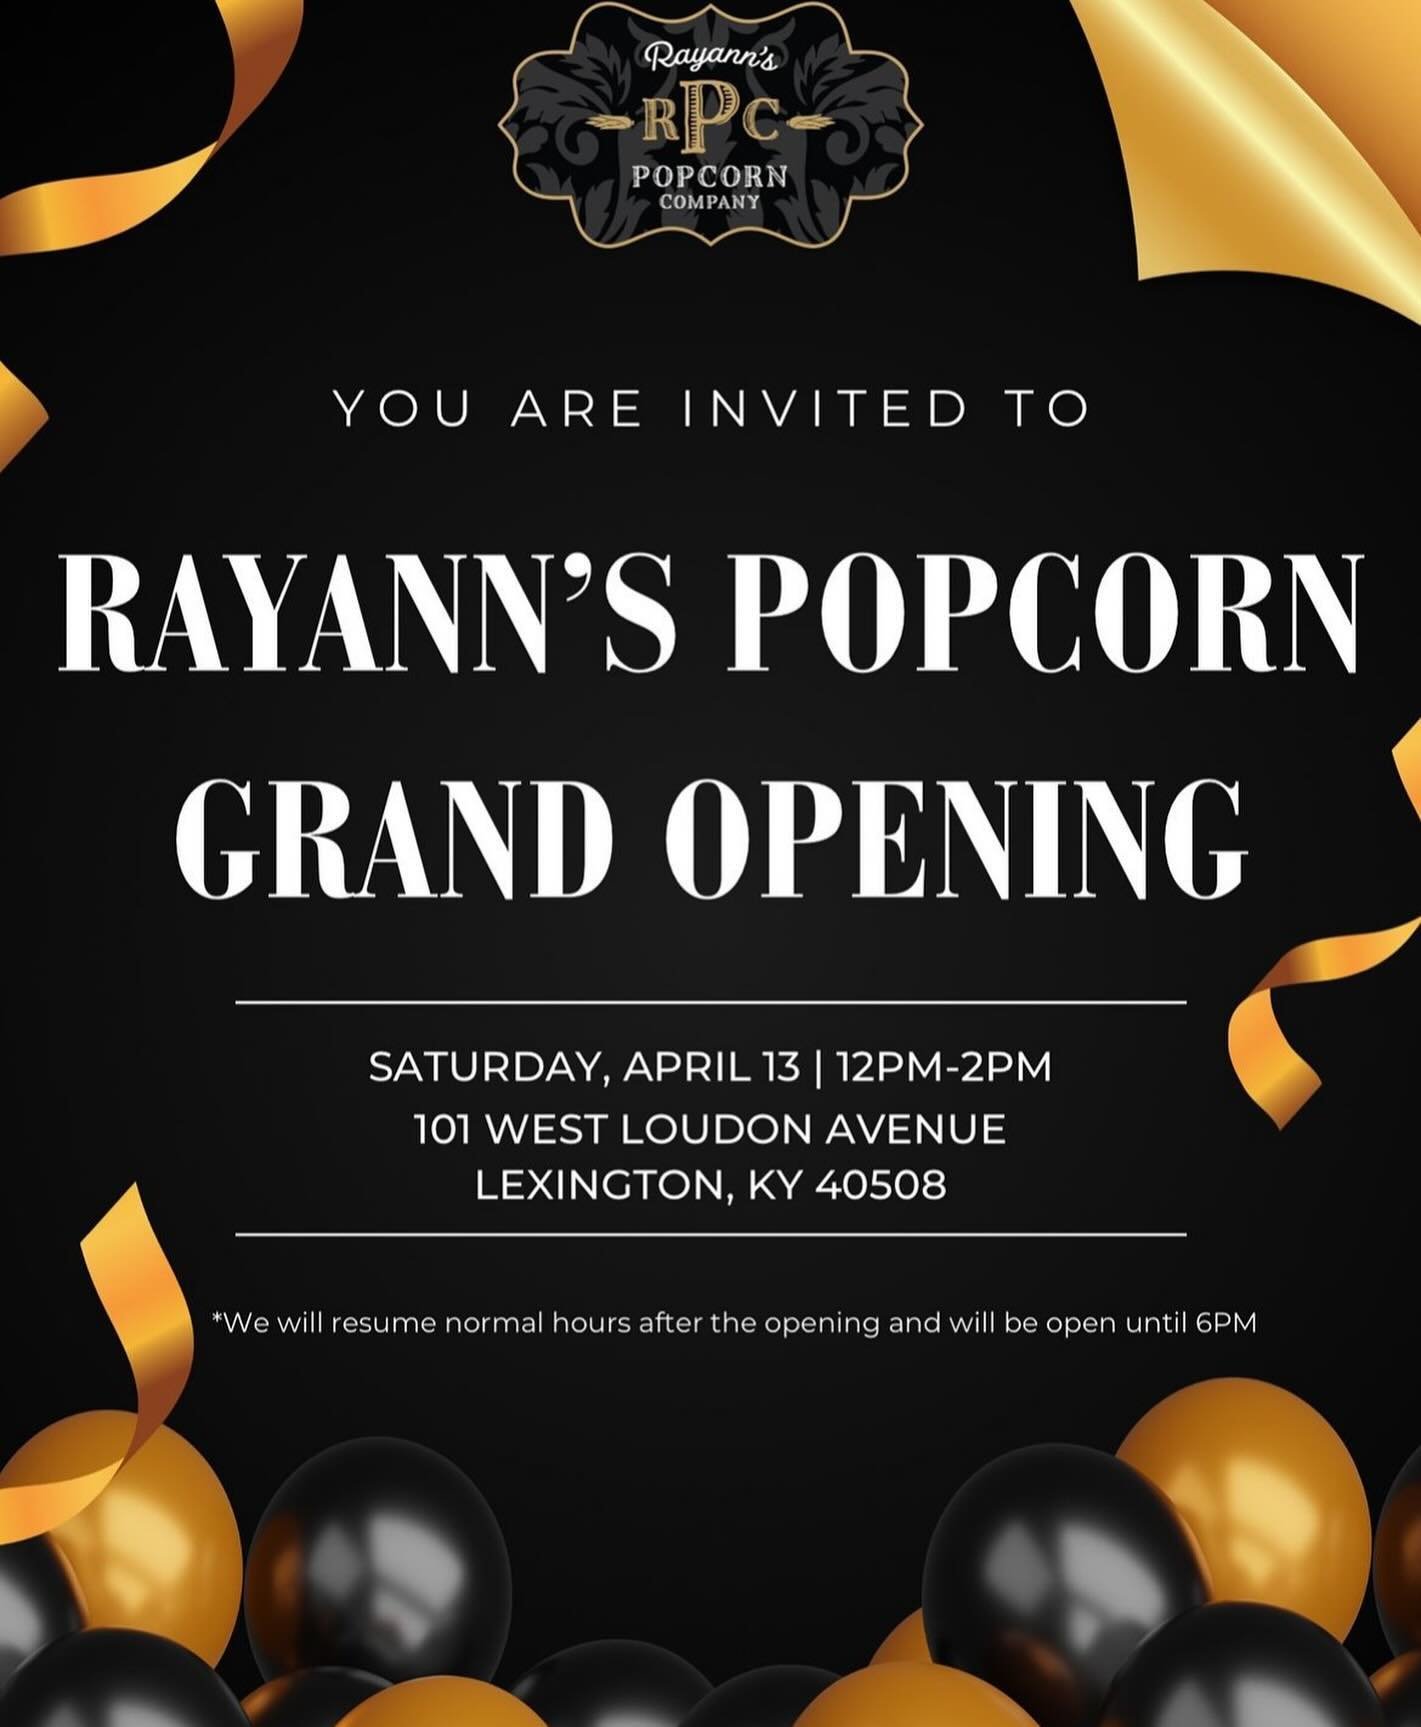 Join us for Rayann's Popcorn Grand Opening on Saturday, April 13th!! 🍿

This is their first-ever storefront and a great way to spend your Saturday with friends and family!